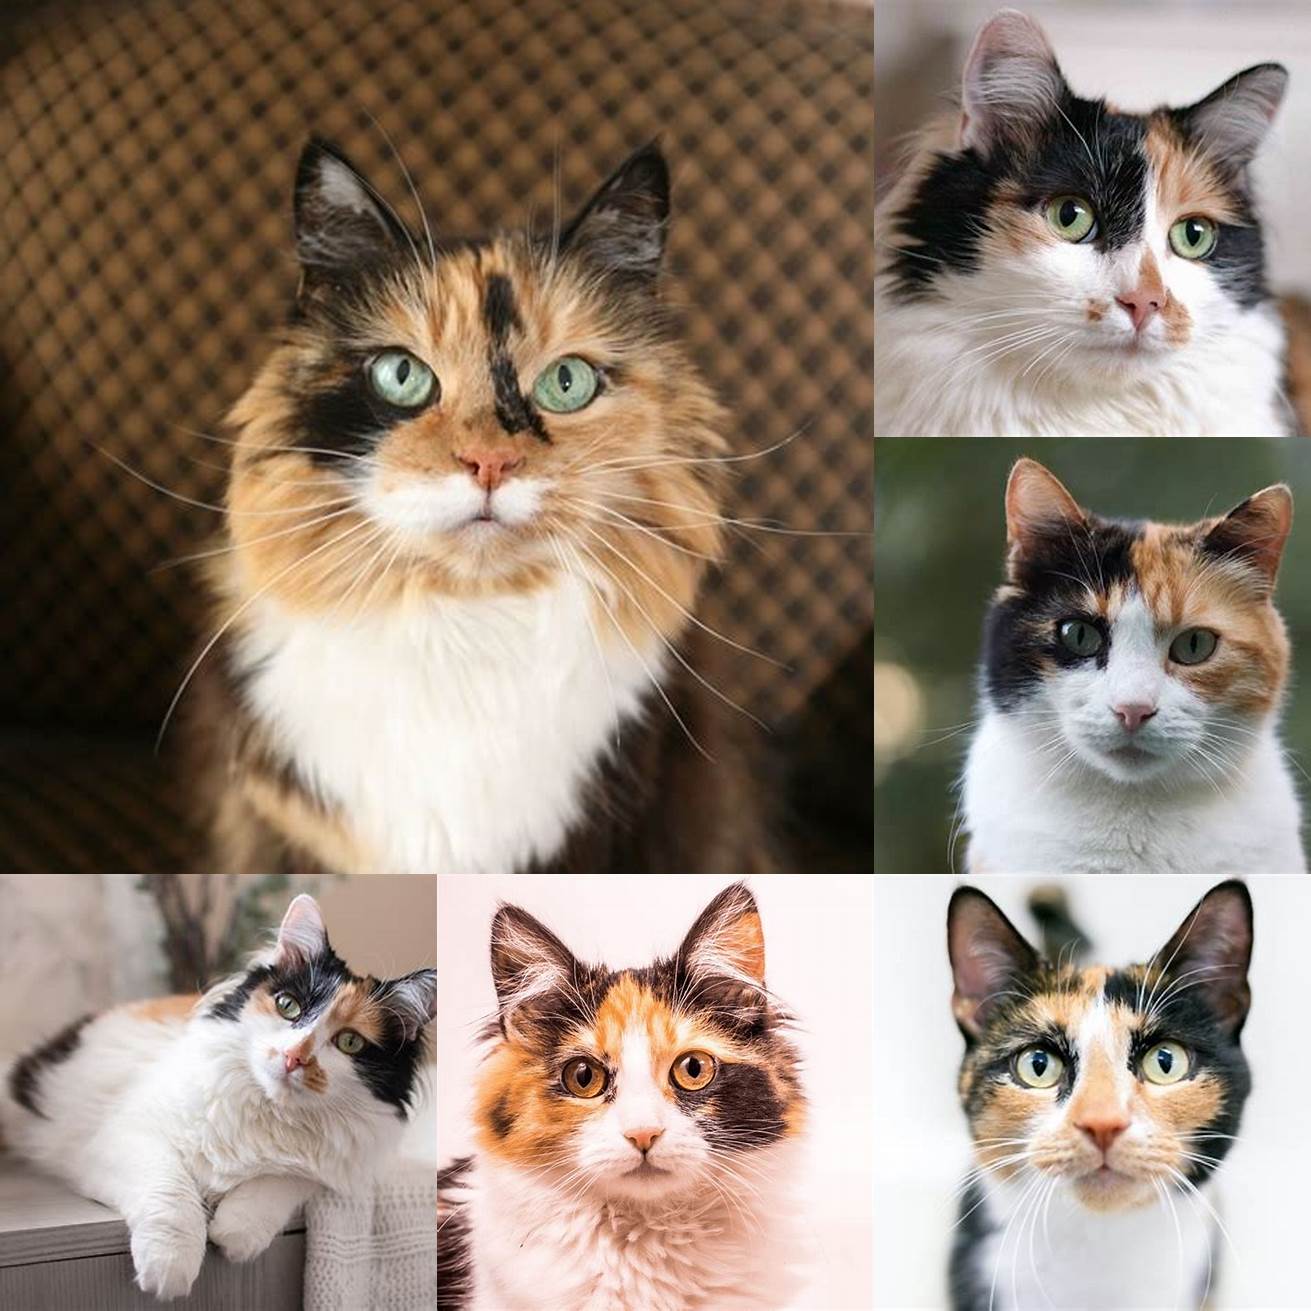 Do calico cats have any special personality traits